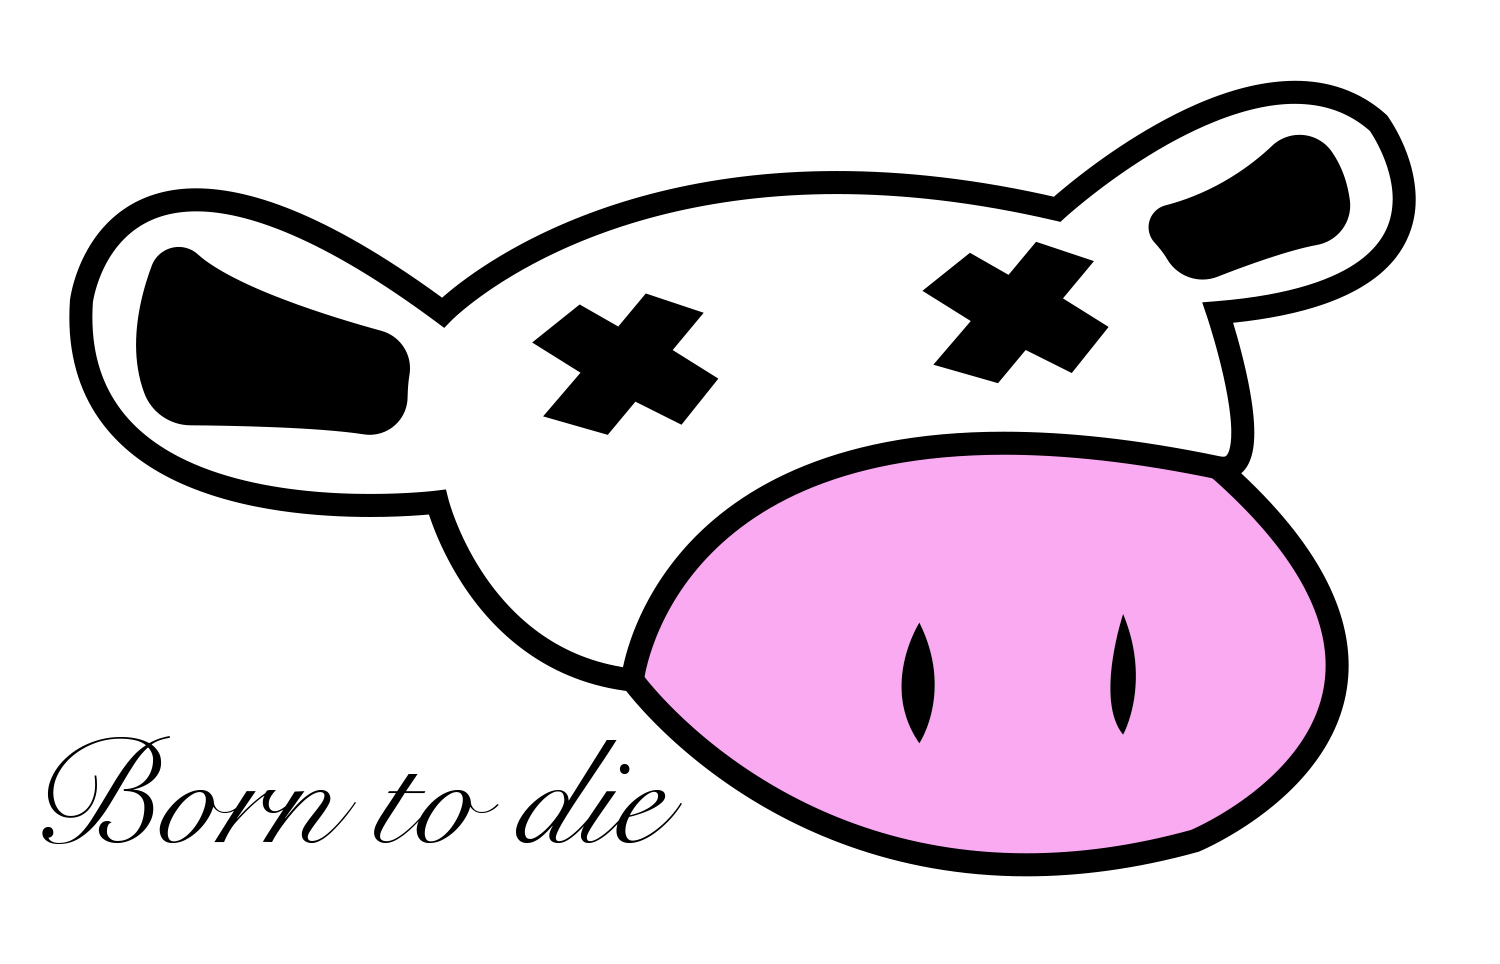 Born to die cow